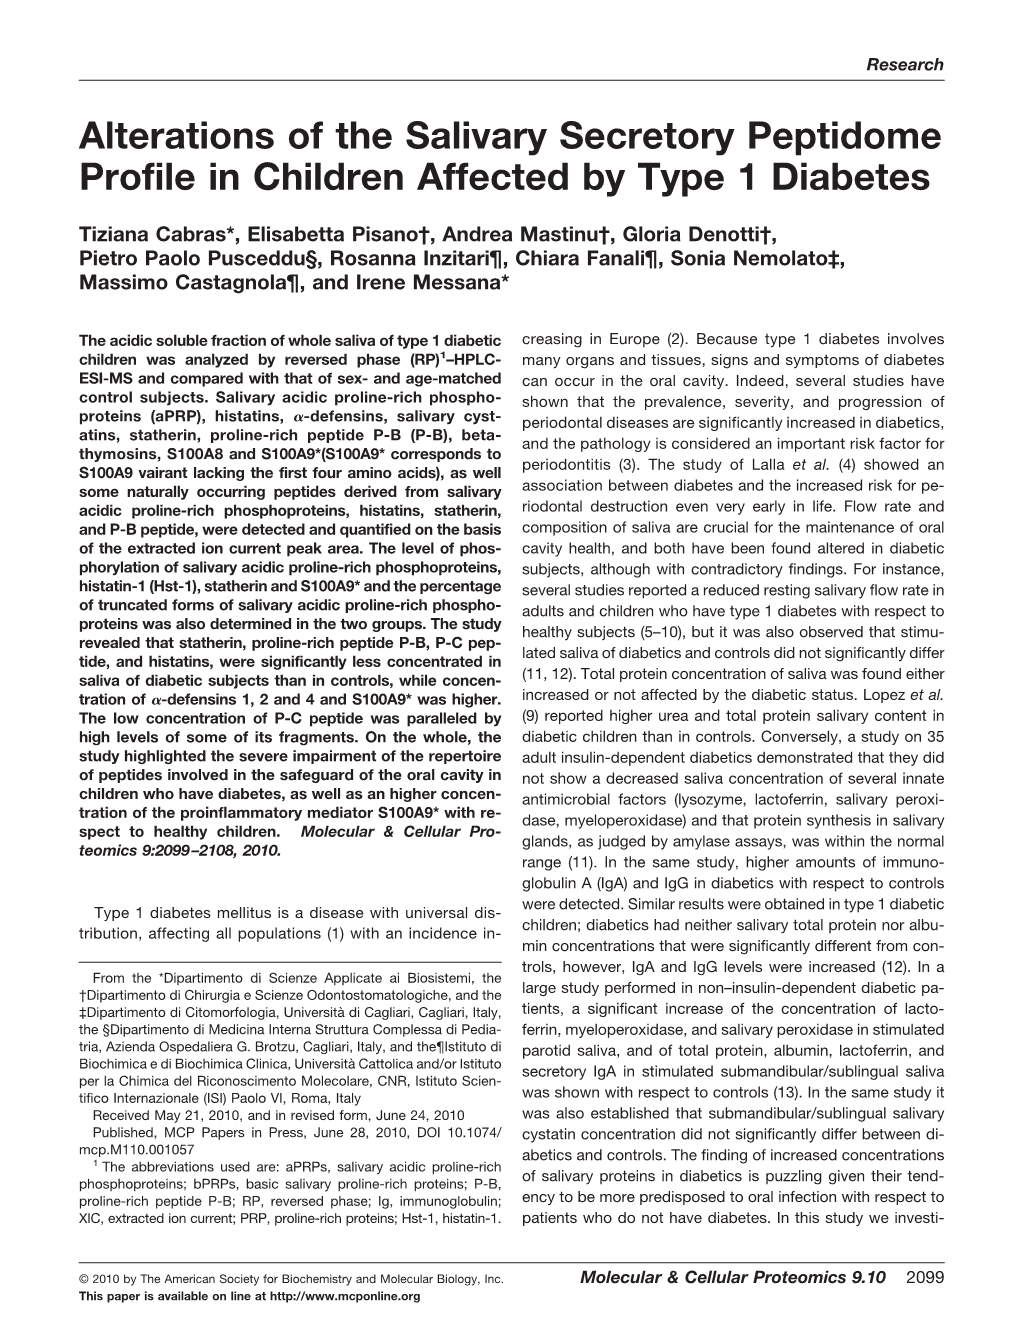 Alterations of the Salivary Secretory Peptidome Profile in Children Affected by Type 1 Diabetes